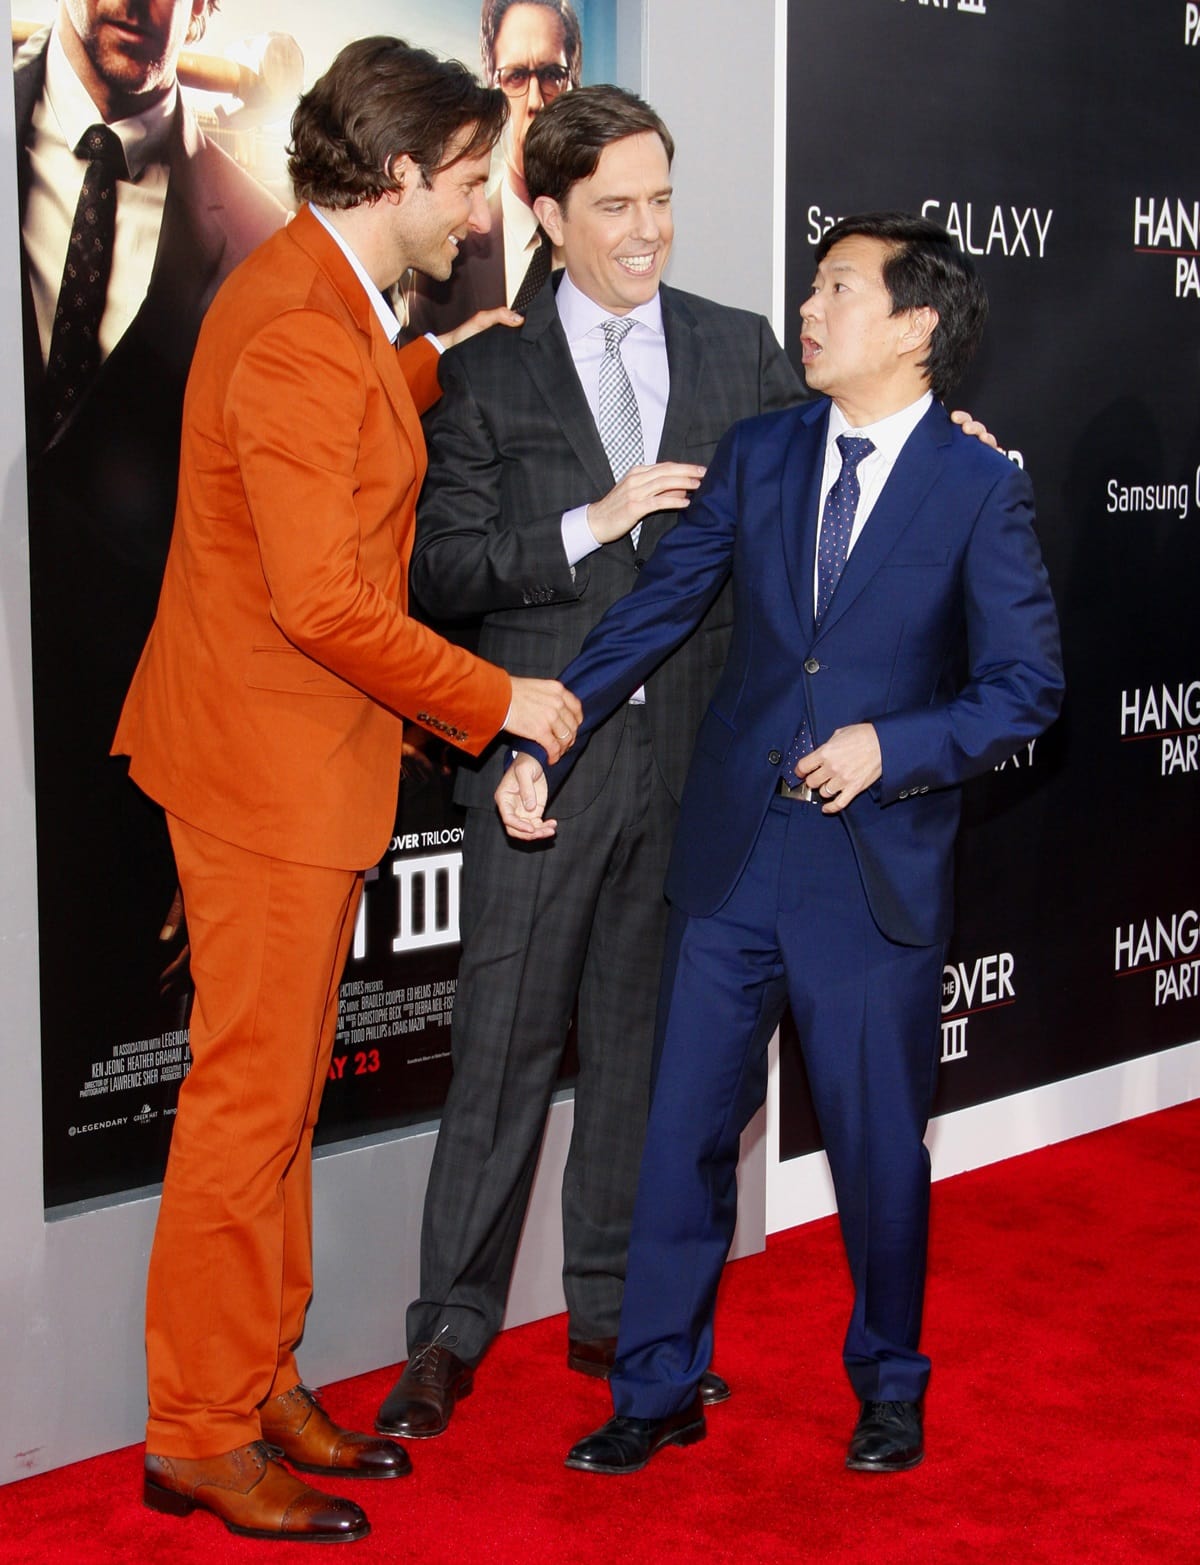 Ed Helms stands at 5ft 11 ½ (181.6 cm), while Ken Jeong is 5ft 4 (162.6 cm), and Bradley Cooper measures 6ft ½ in (184.2 cm)